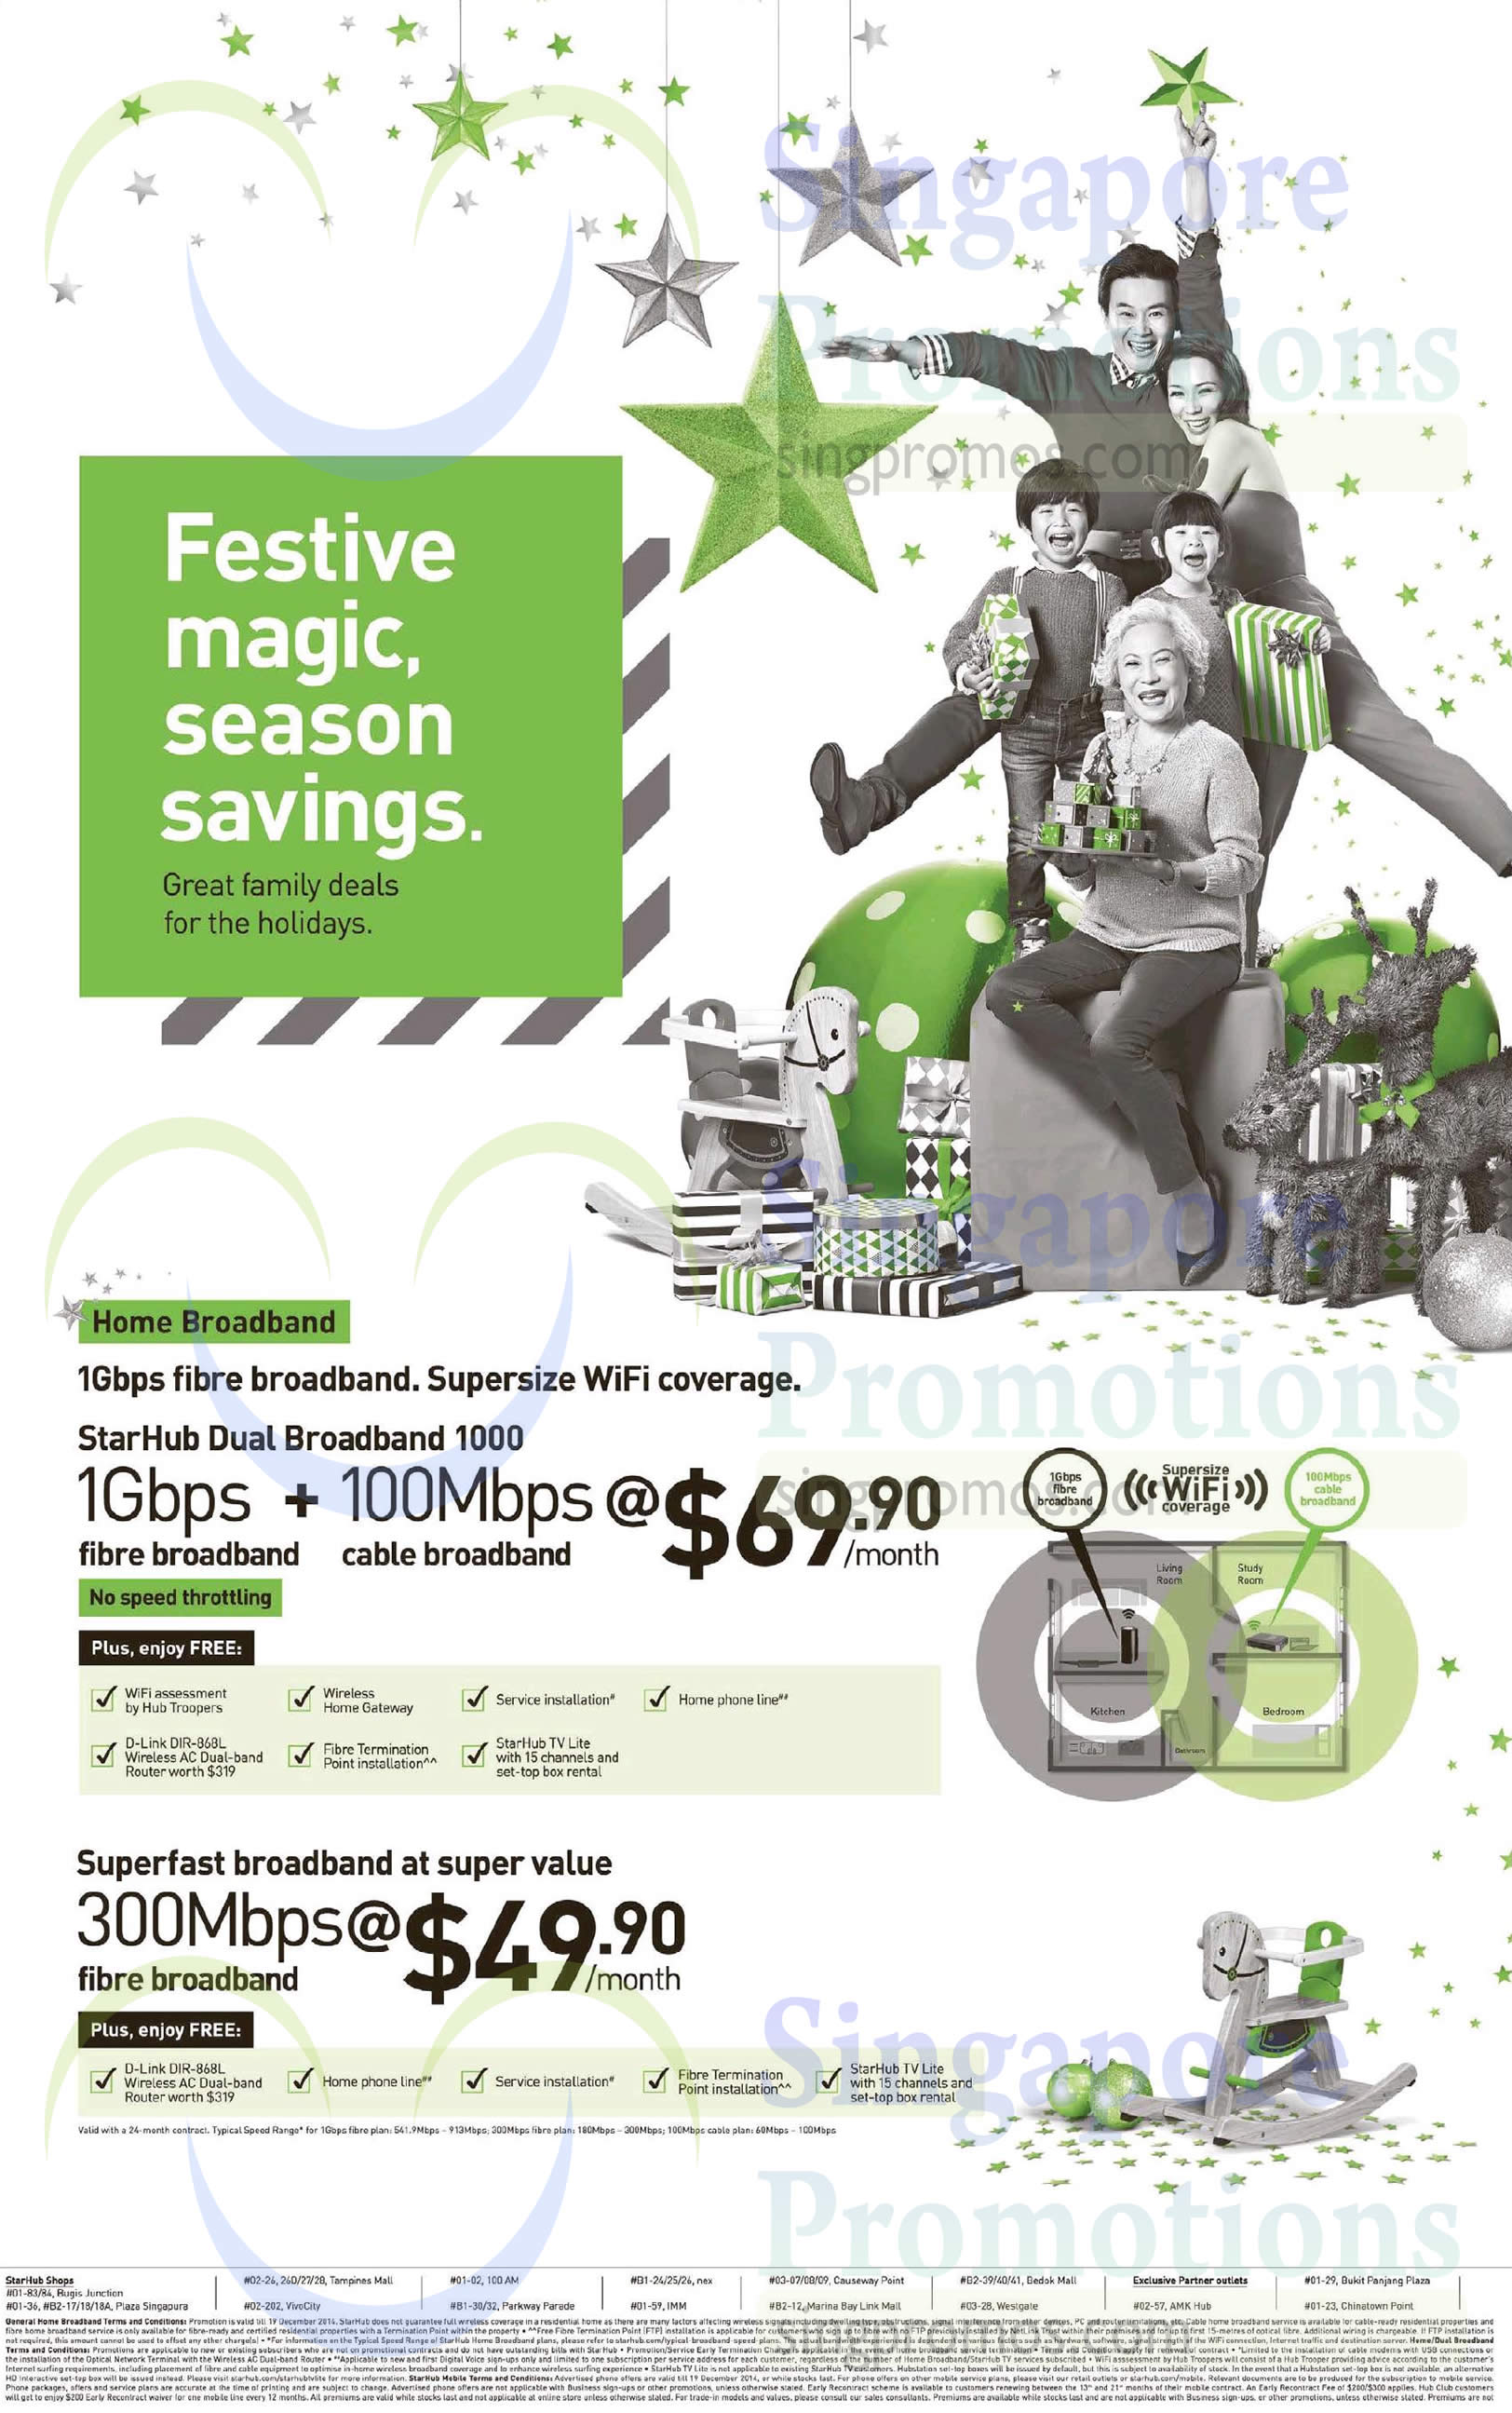 Featured image for Starhub Smartphones, Tablets, Cable TV & Broadband Offers 13 - 19 Dec 2014